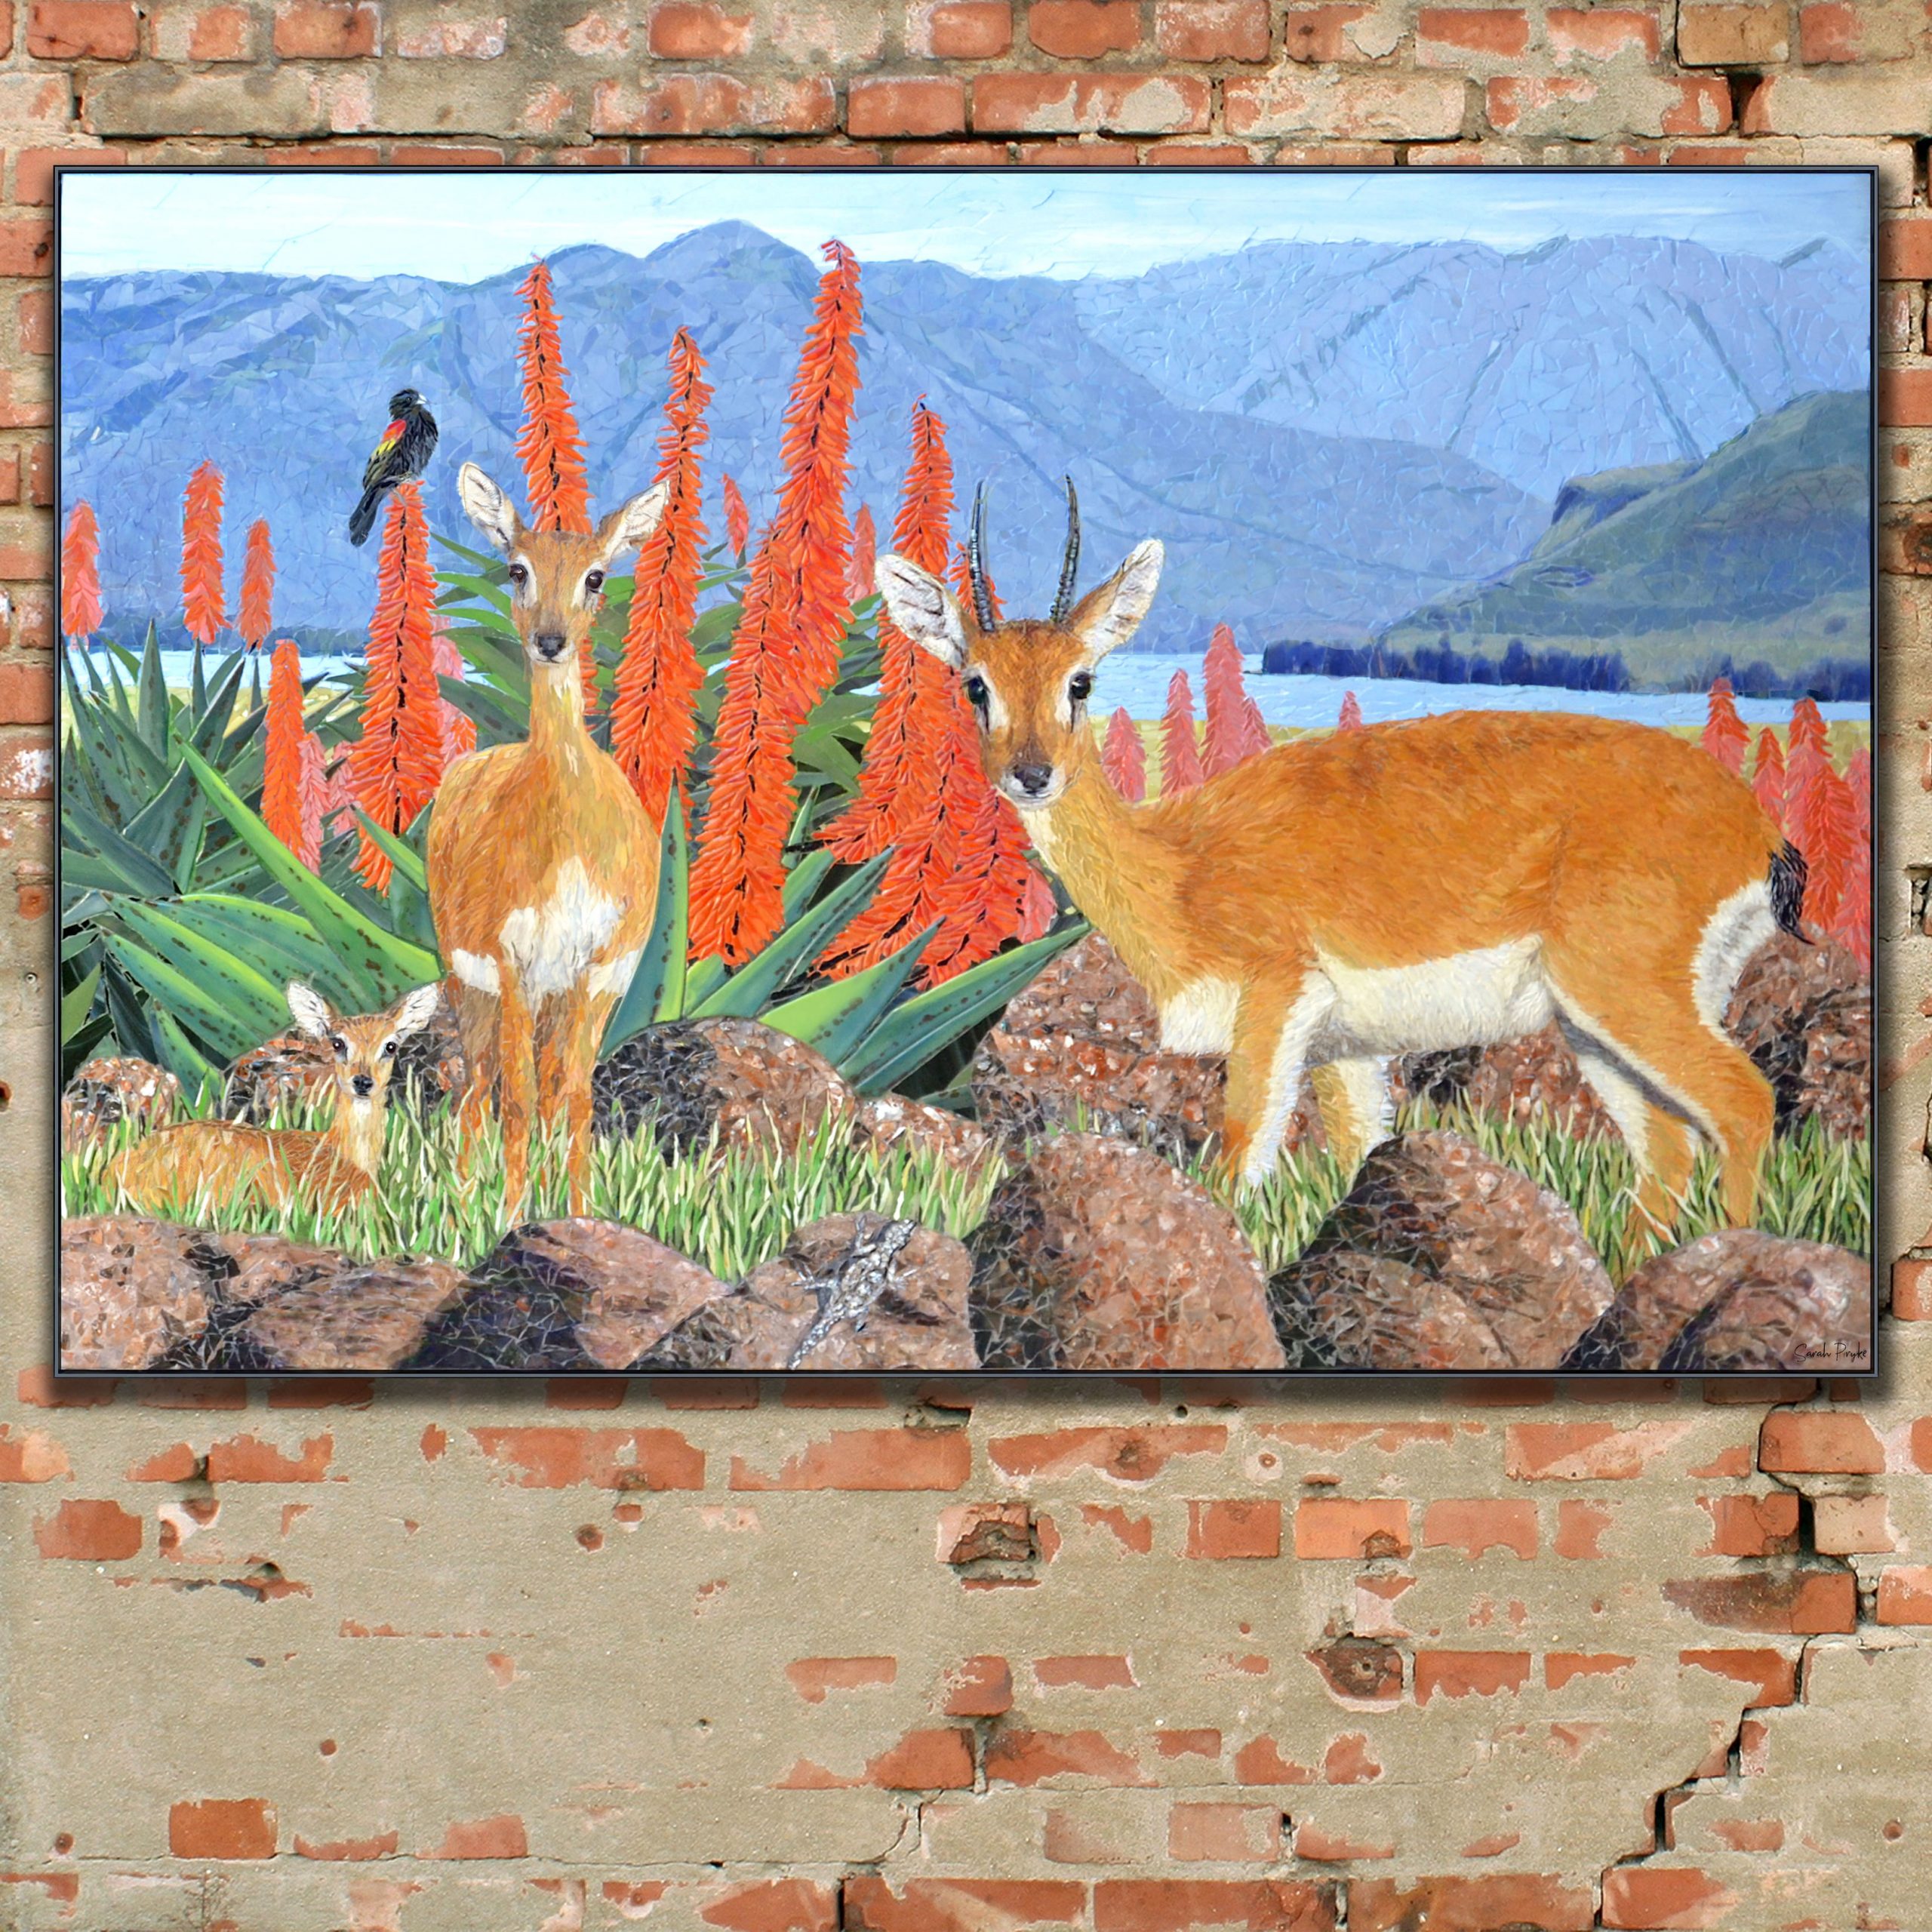 Title: “Oribis and Aloes”<br/> 
Size: 800x1200 cm<br/>
Price: COMMISSION (South Africa)<br/>  
Inspiration: Combining photos and ideas from the client's lovely home to create a scene with a family of oribi in the grasslands with the bright orange-red aloes, and beautiful Midmar dam as the backdrop. 